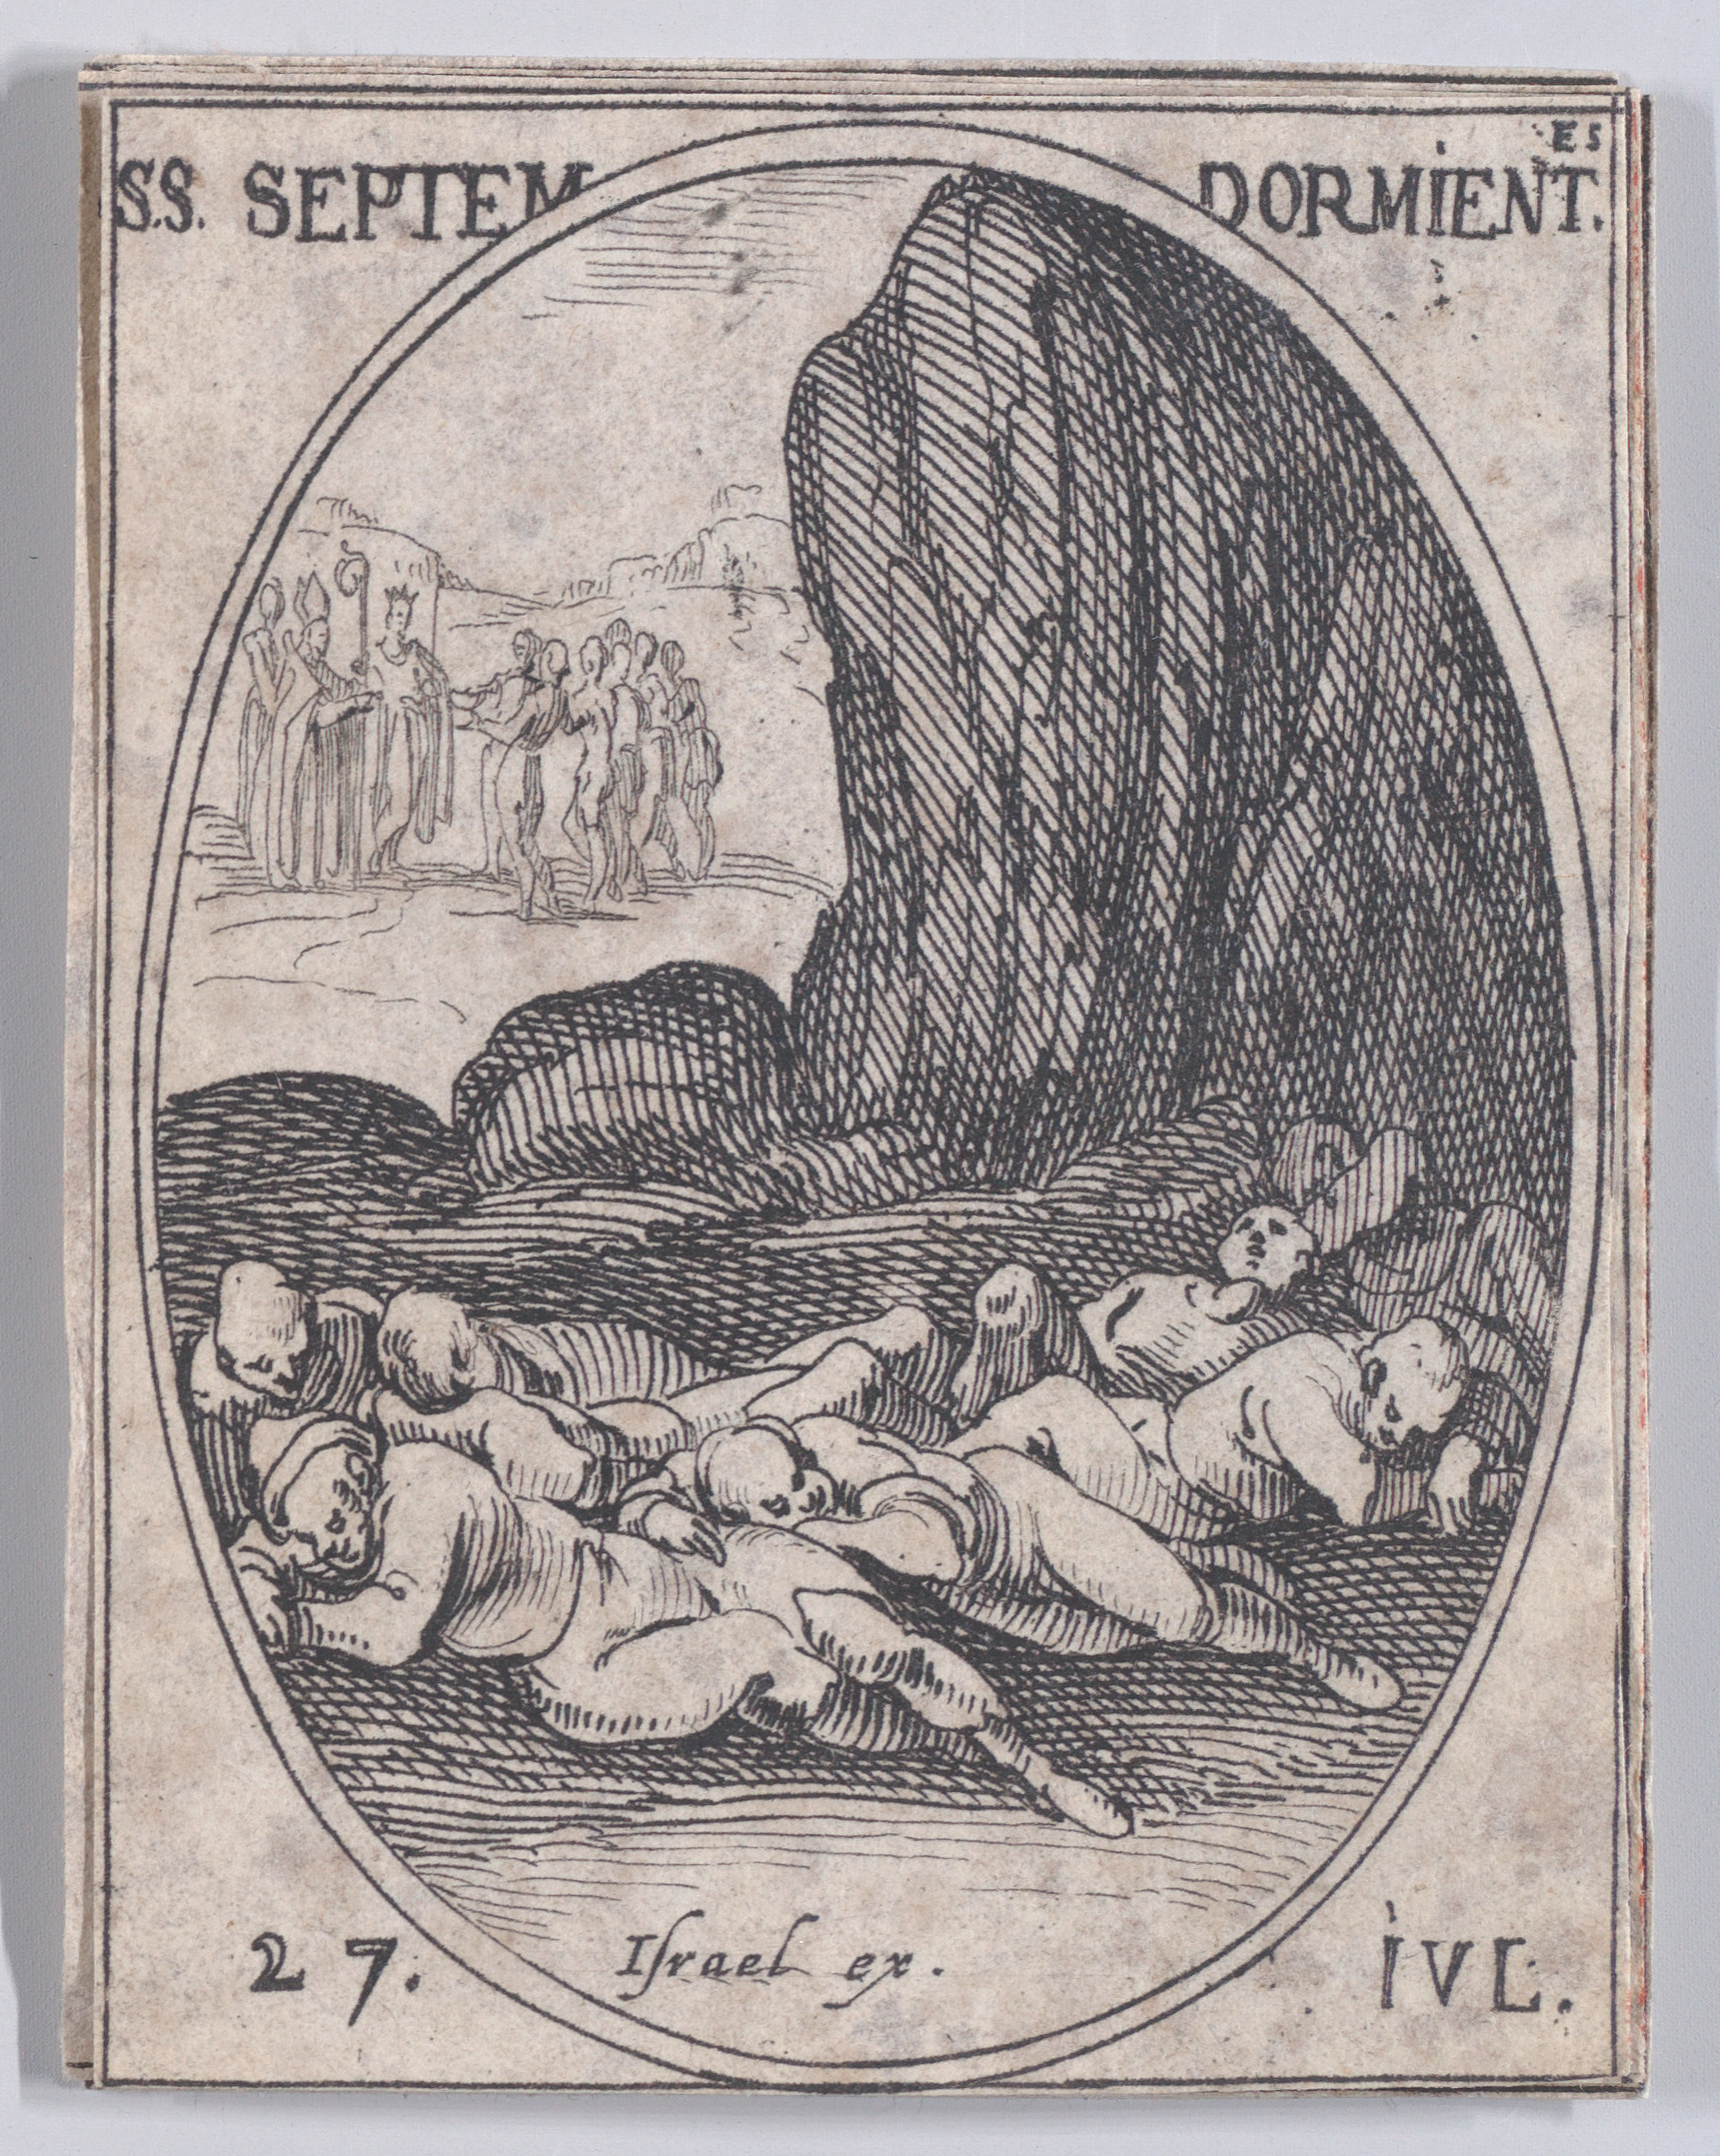 Les Sept Bienheureux Dormants (The Seven Blessed Sleepers), July 27th, from Les Images De Tous Les Saincts et Saintes de L'Année (Images of All of the Saints and Religious Events of the Year), Jacques Callot (French, Nancy 1592–1635 Nancy), Etching; second state of two (Lieure)